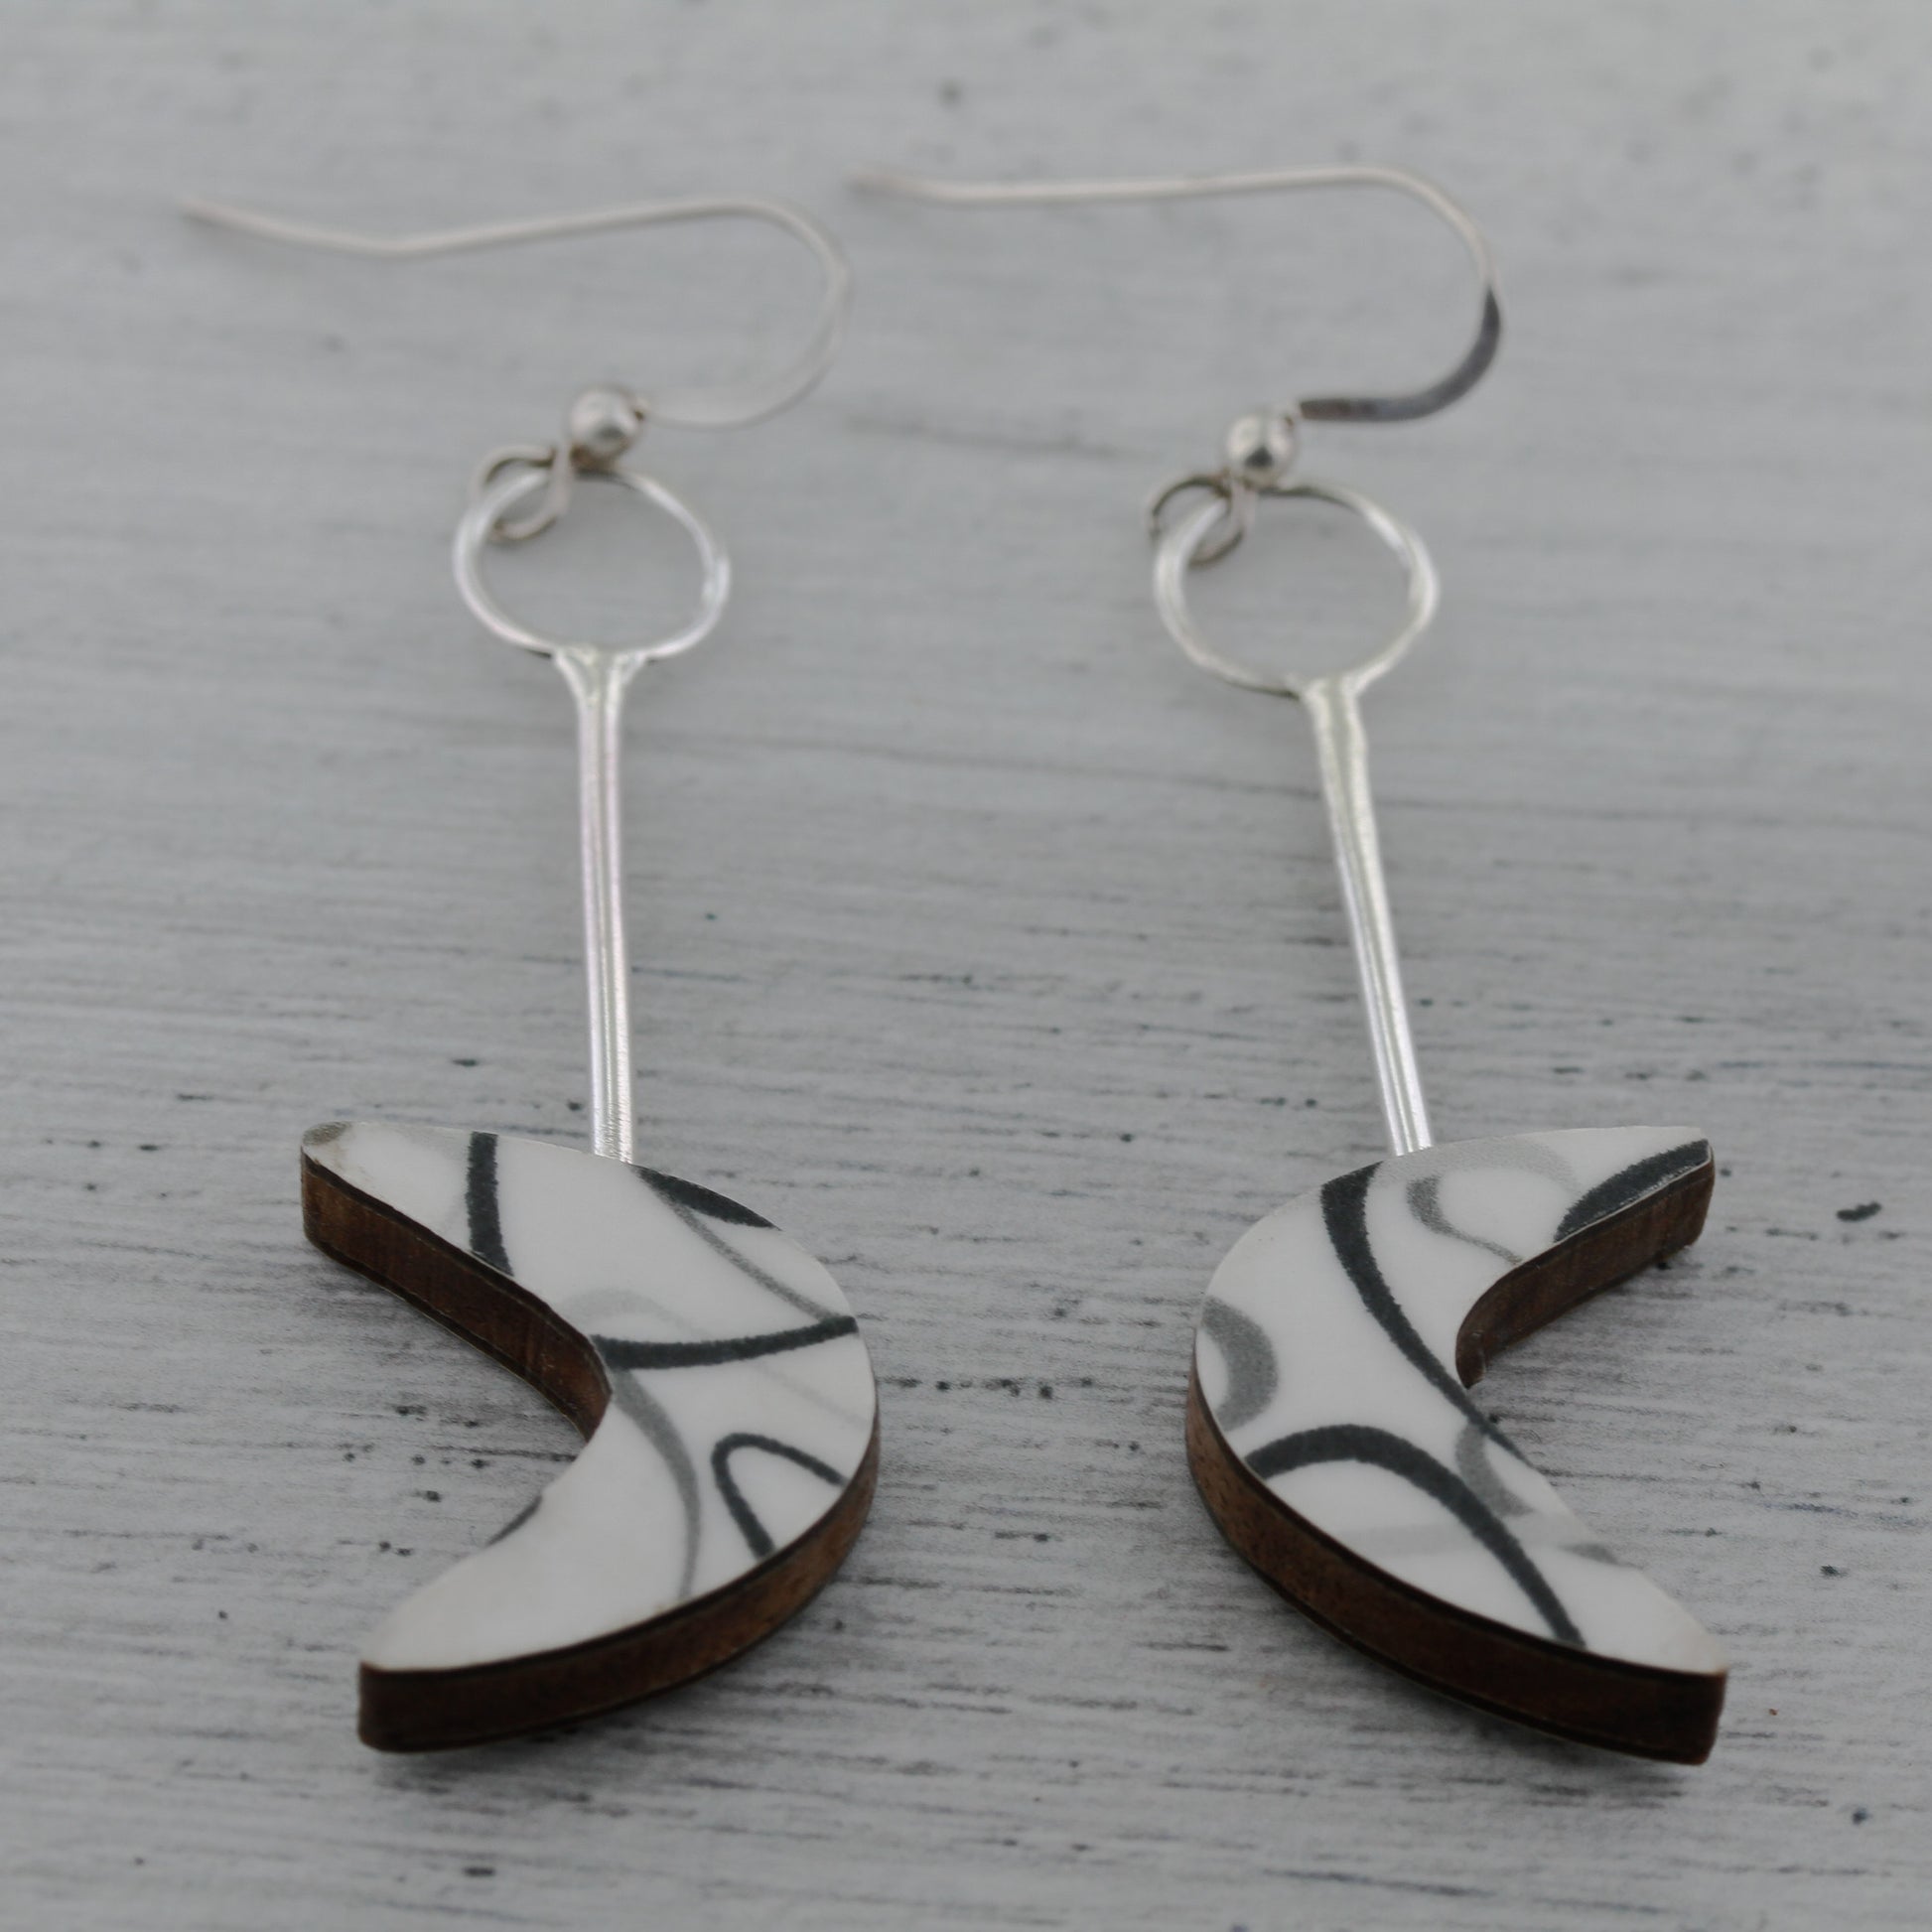 White and black boomerang laminate on wood earrings inspired by mid century modern design.